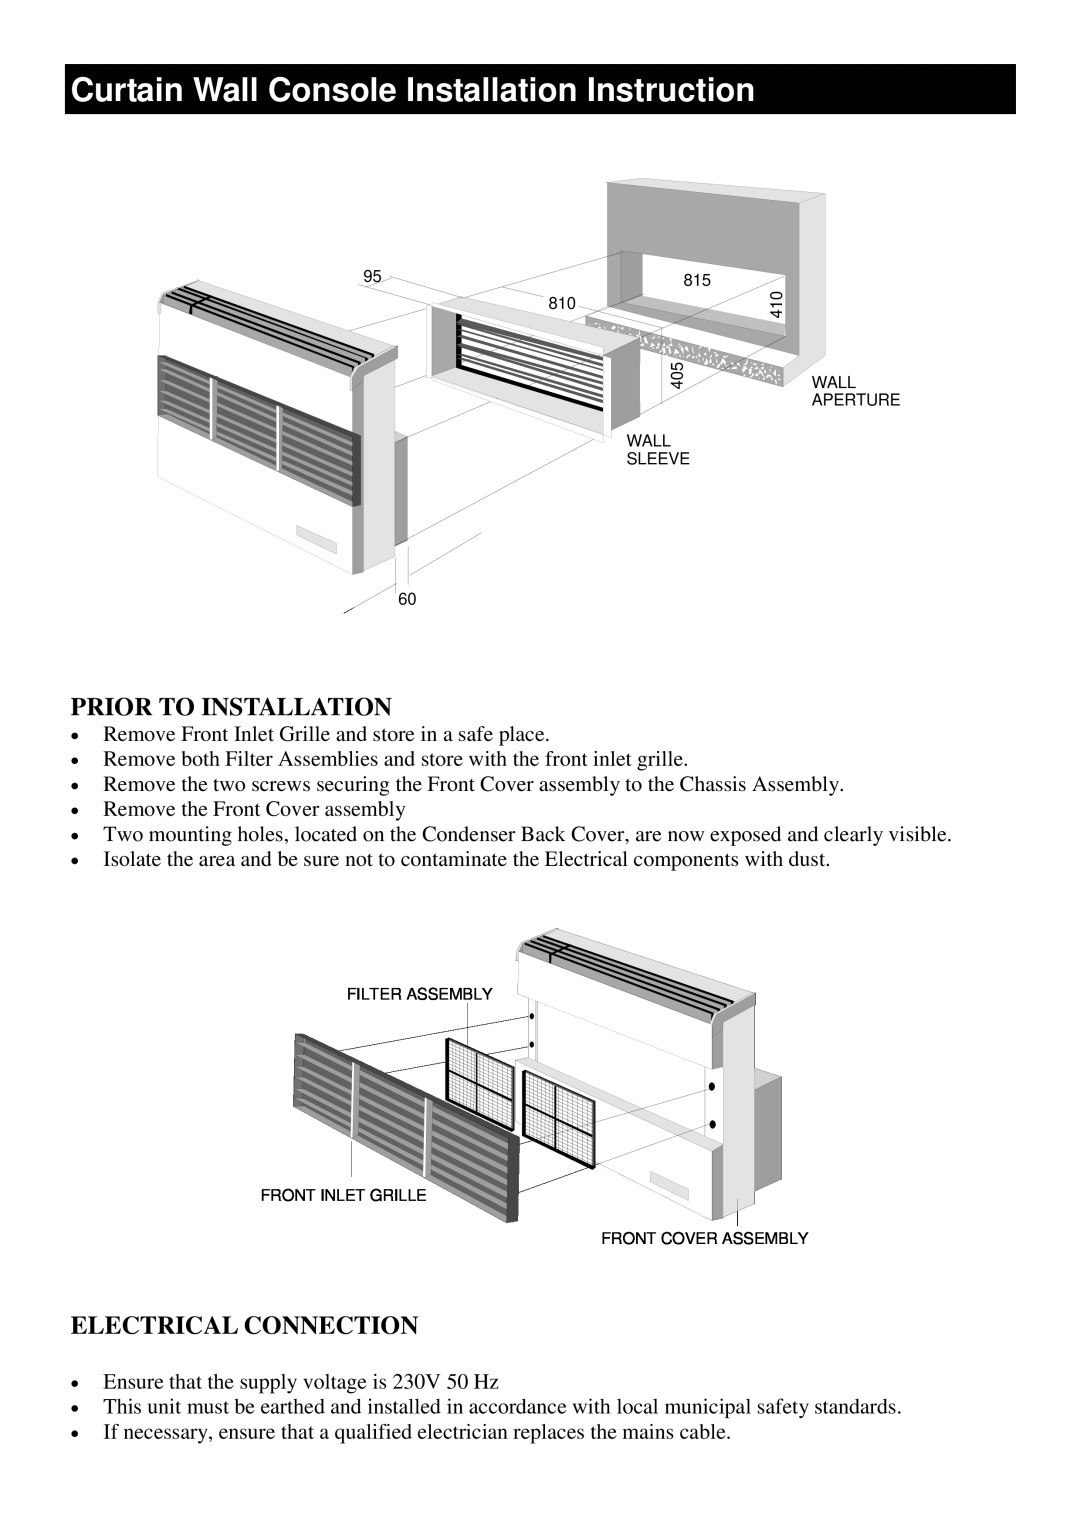 Defy Appliances Part Number 059 044 Curtain Wall Console Installation Instruction, Prior To Installation 